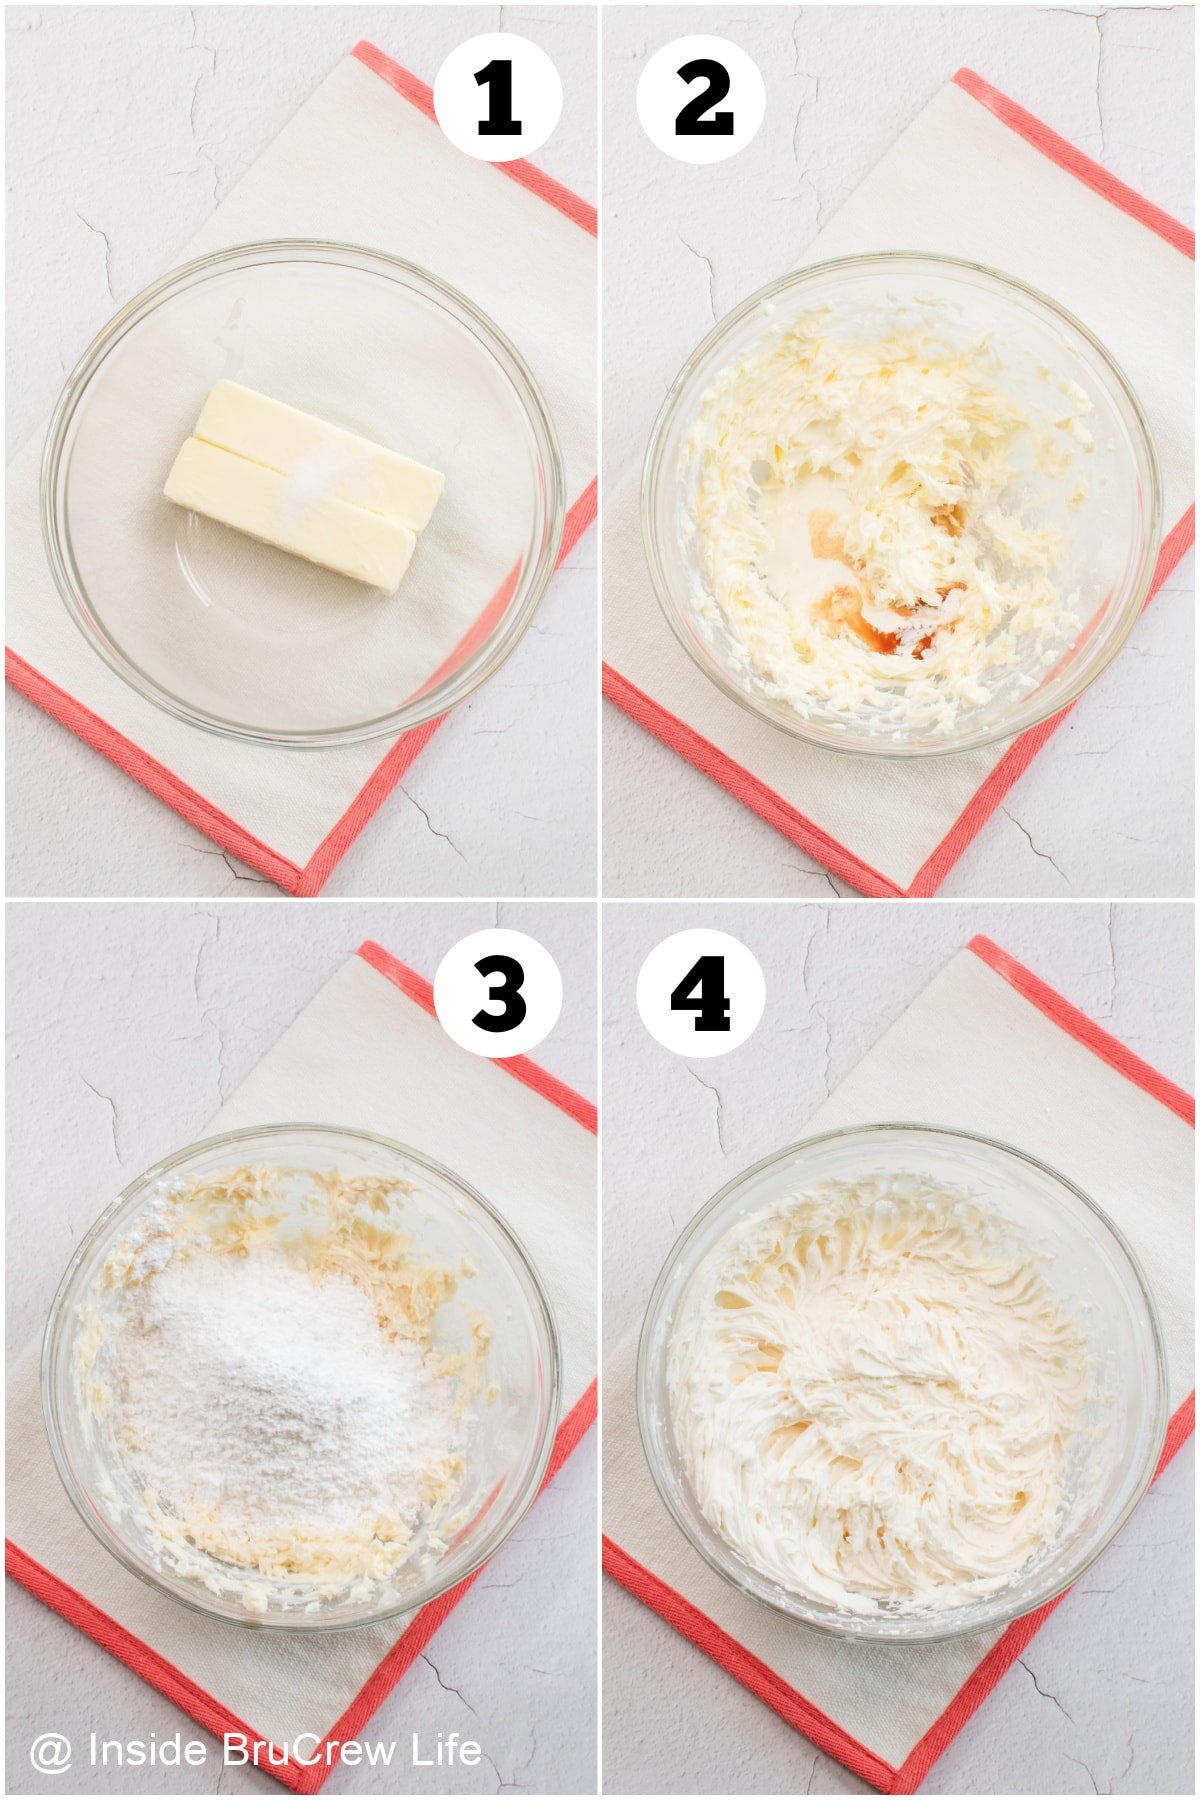 Four pictures showing the steps for making a coconut buttercream frosting.